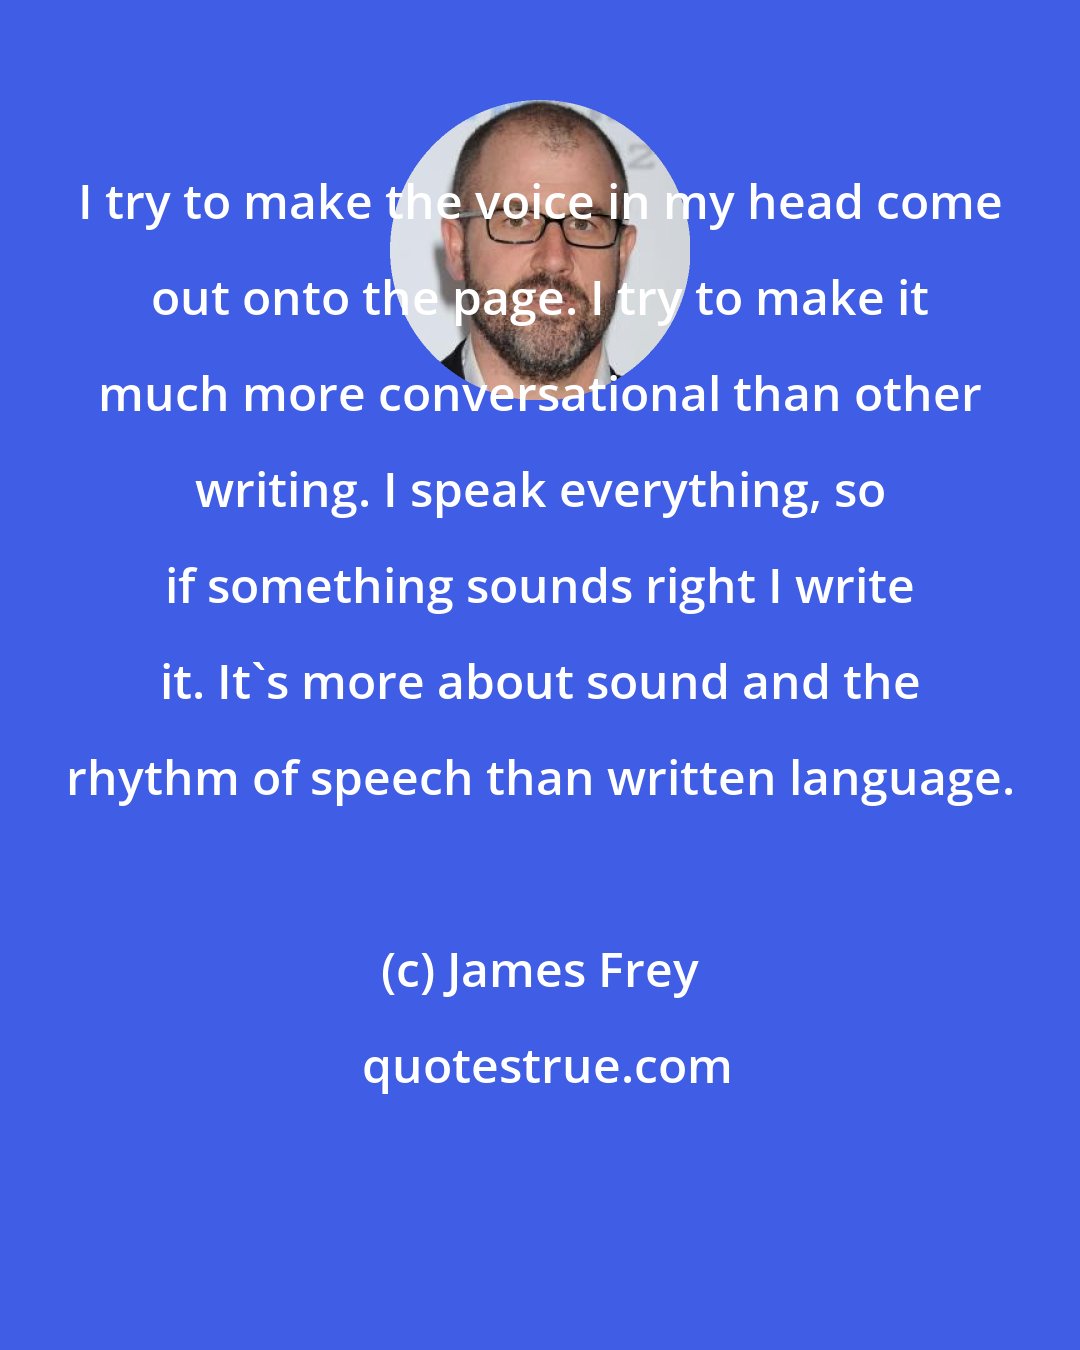 James Frey: I try to make the voice in my head come out onto the page. I try to make it much more conversational than other writing. I speak everything, so if something sounds right I write it. It's more about sound and the rhythm of speech than written language.